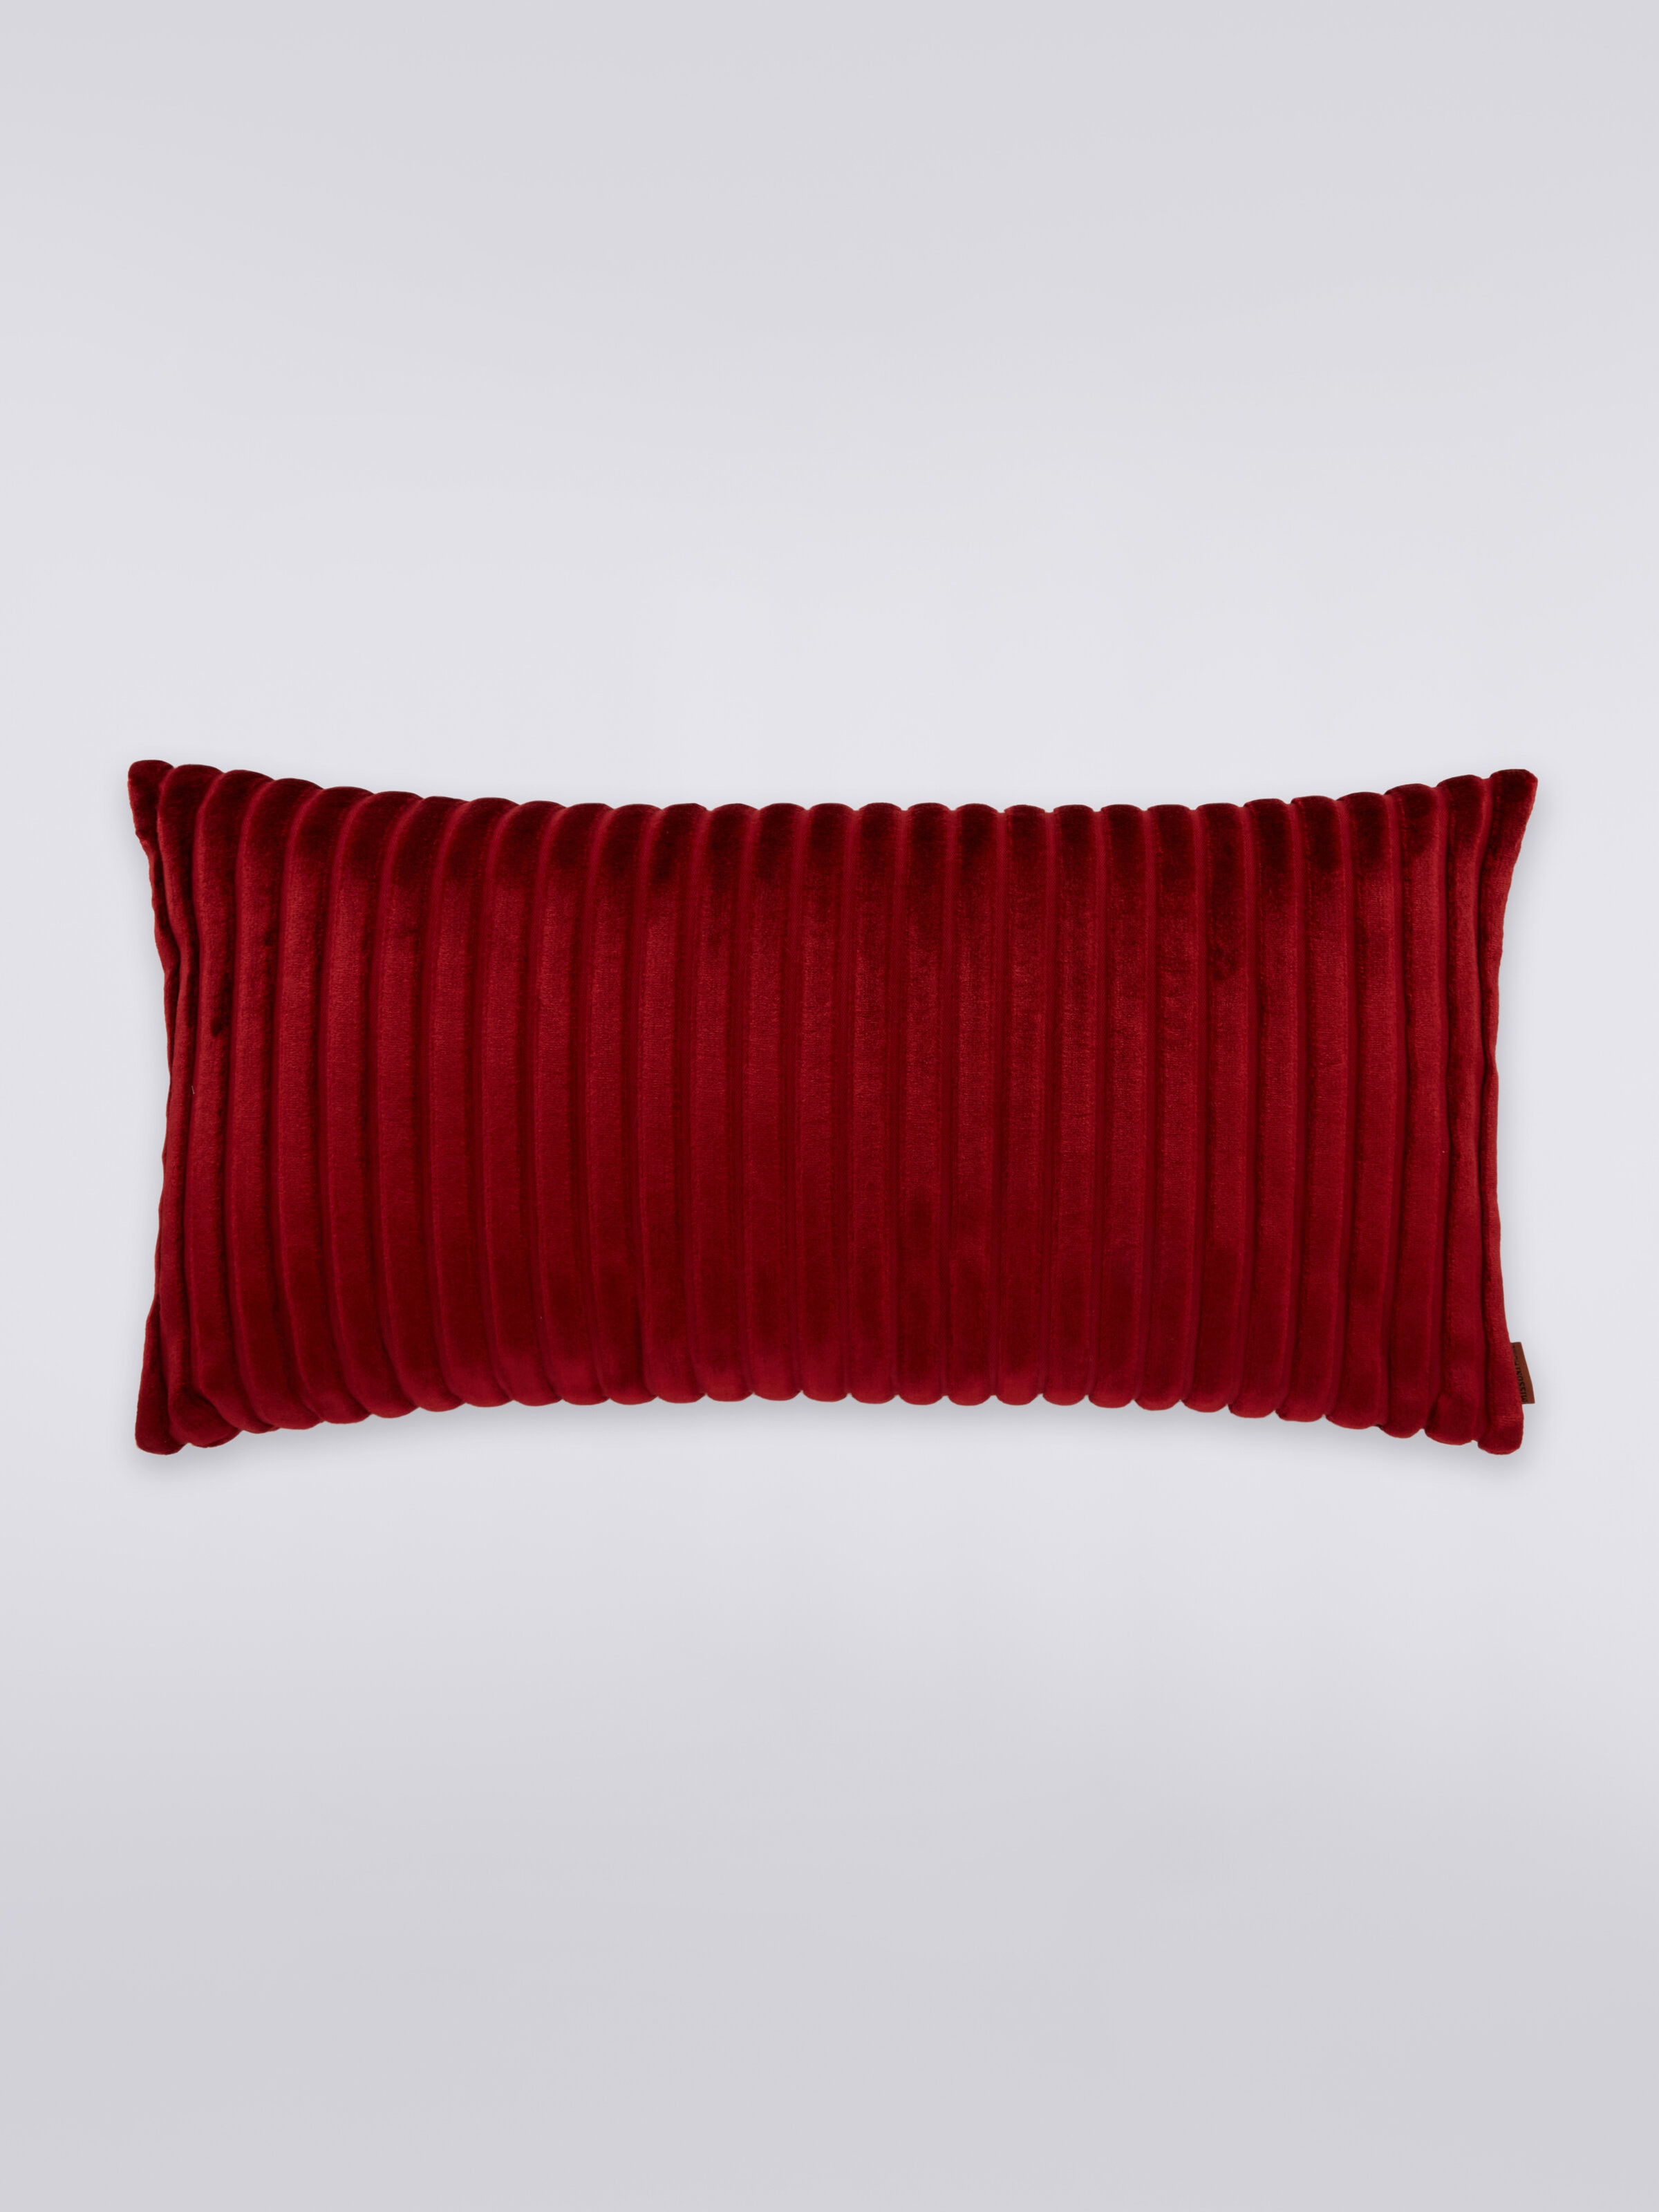 Coomba Cushion 30X60, Red  - 0